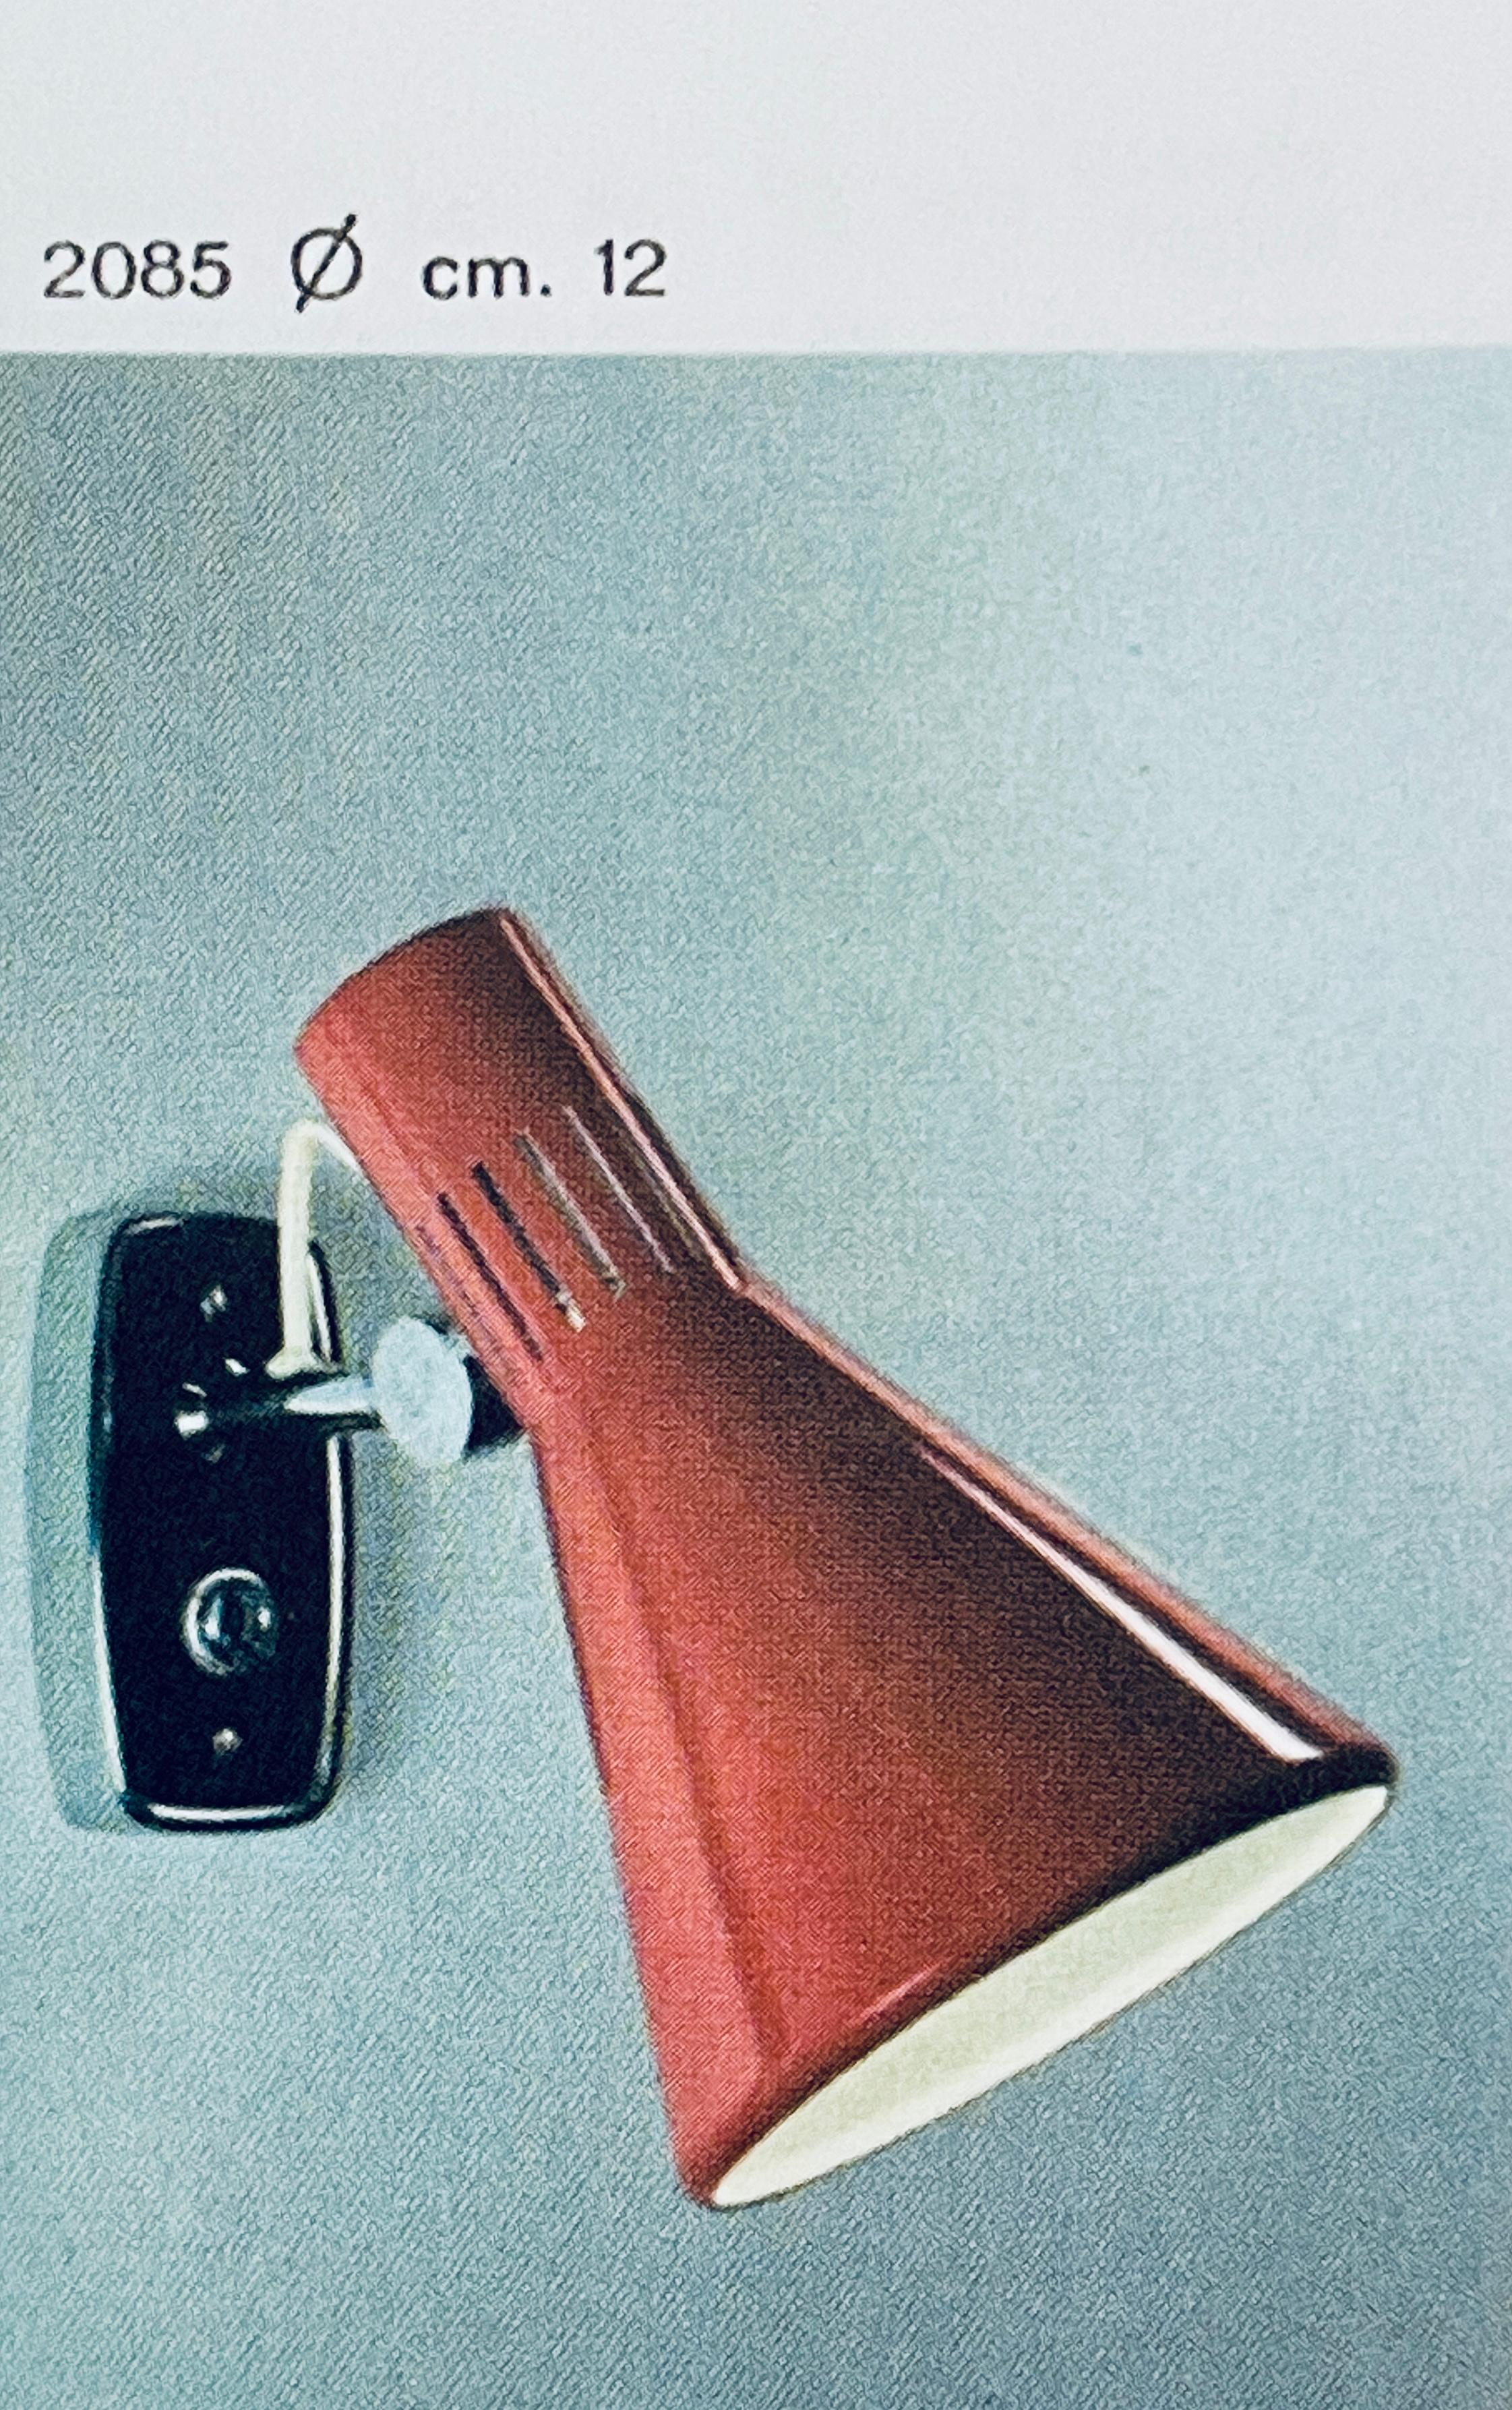 1960s Stilnovo Model #2085 articulating wall lamp with original yellow label a quintessentially 1960s Italian design executed in red painted metal with modified Italian backplate for mounting over a standard American j-box. Shade can be rotated